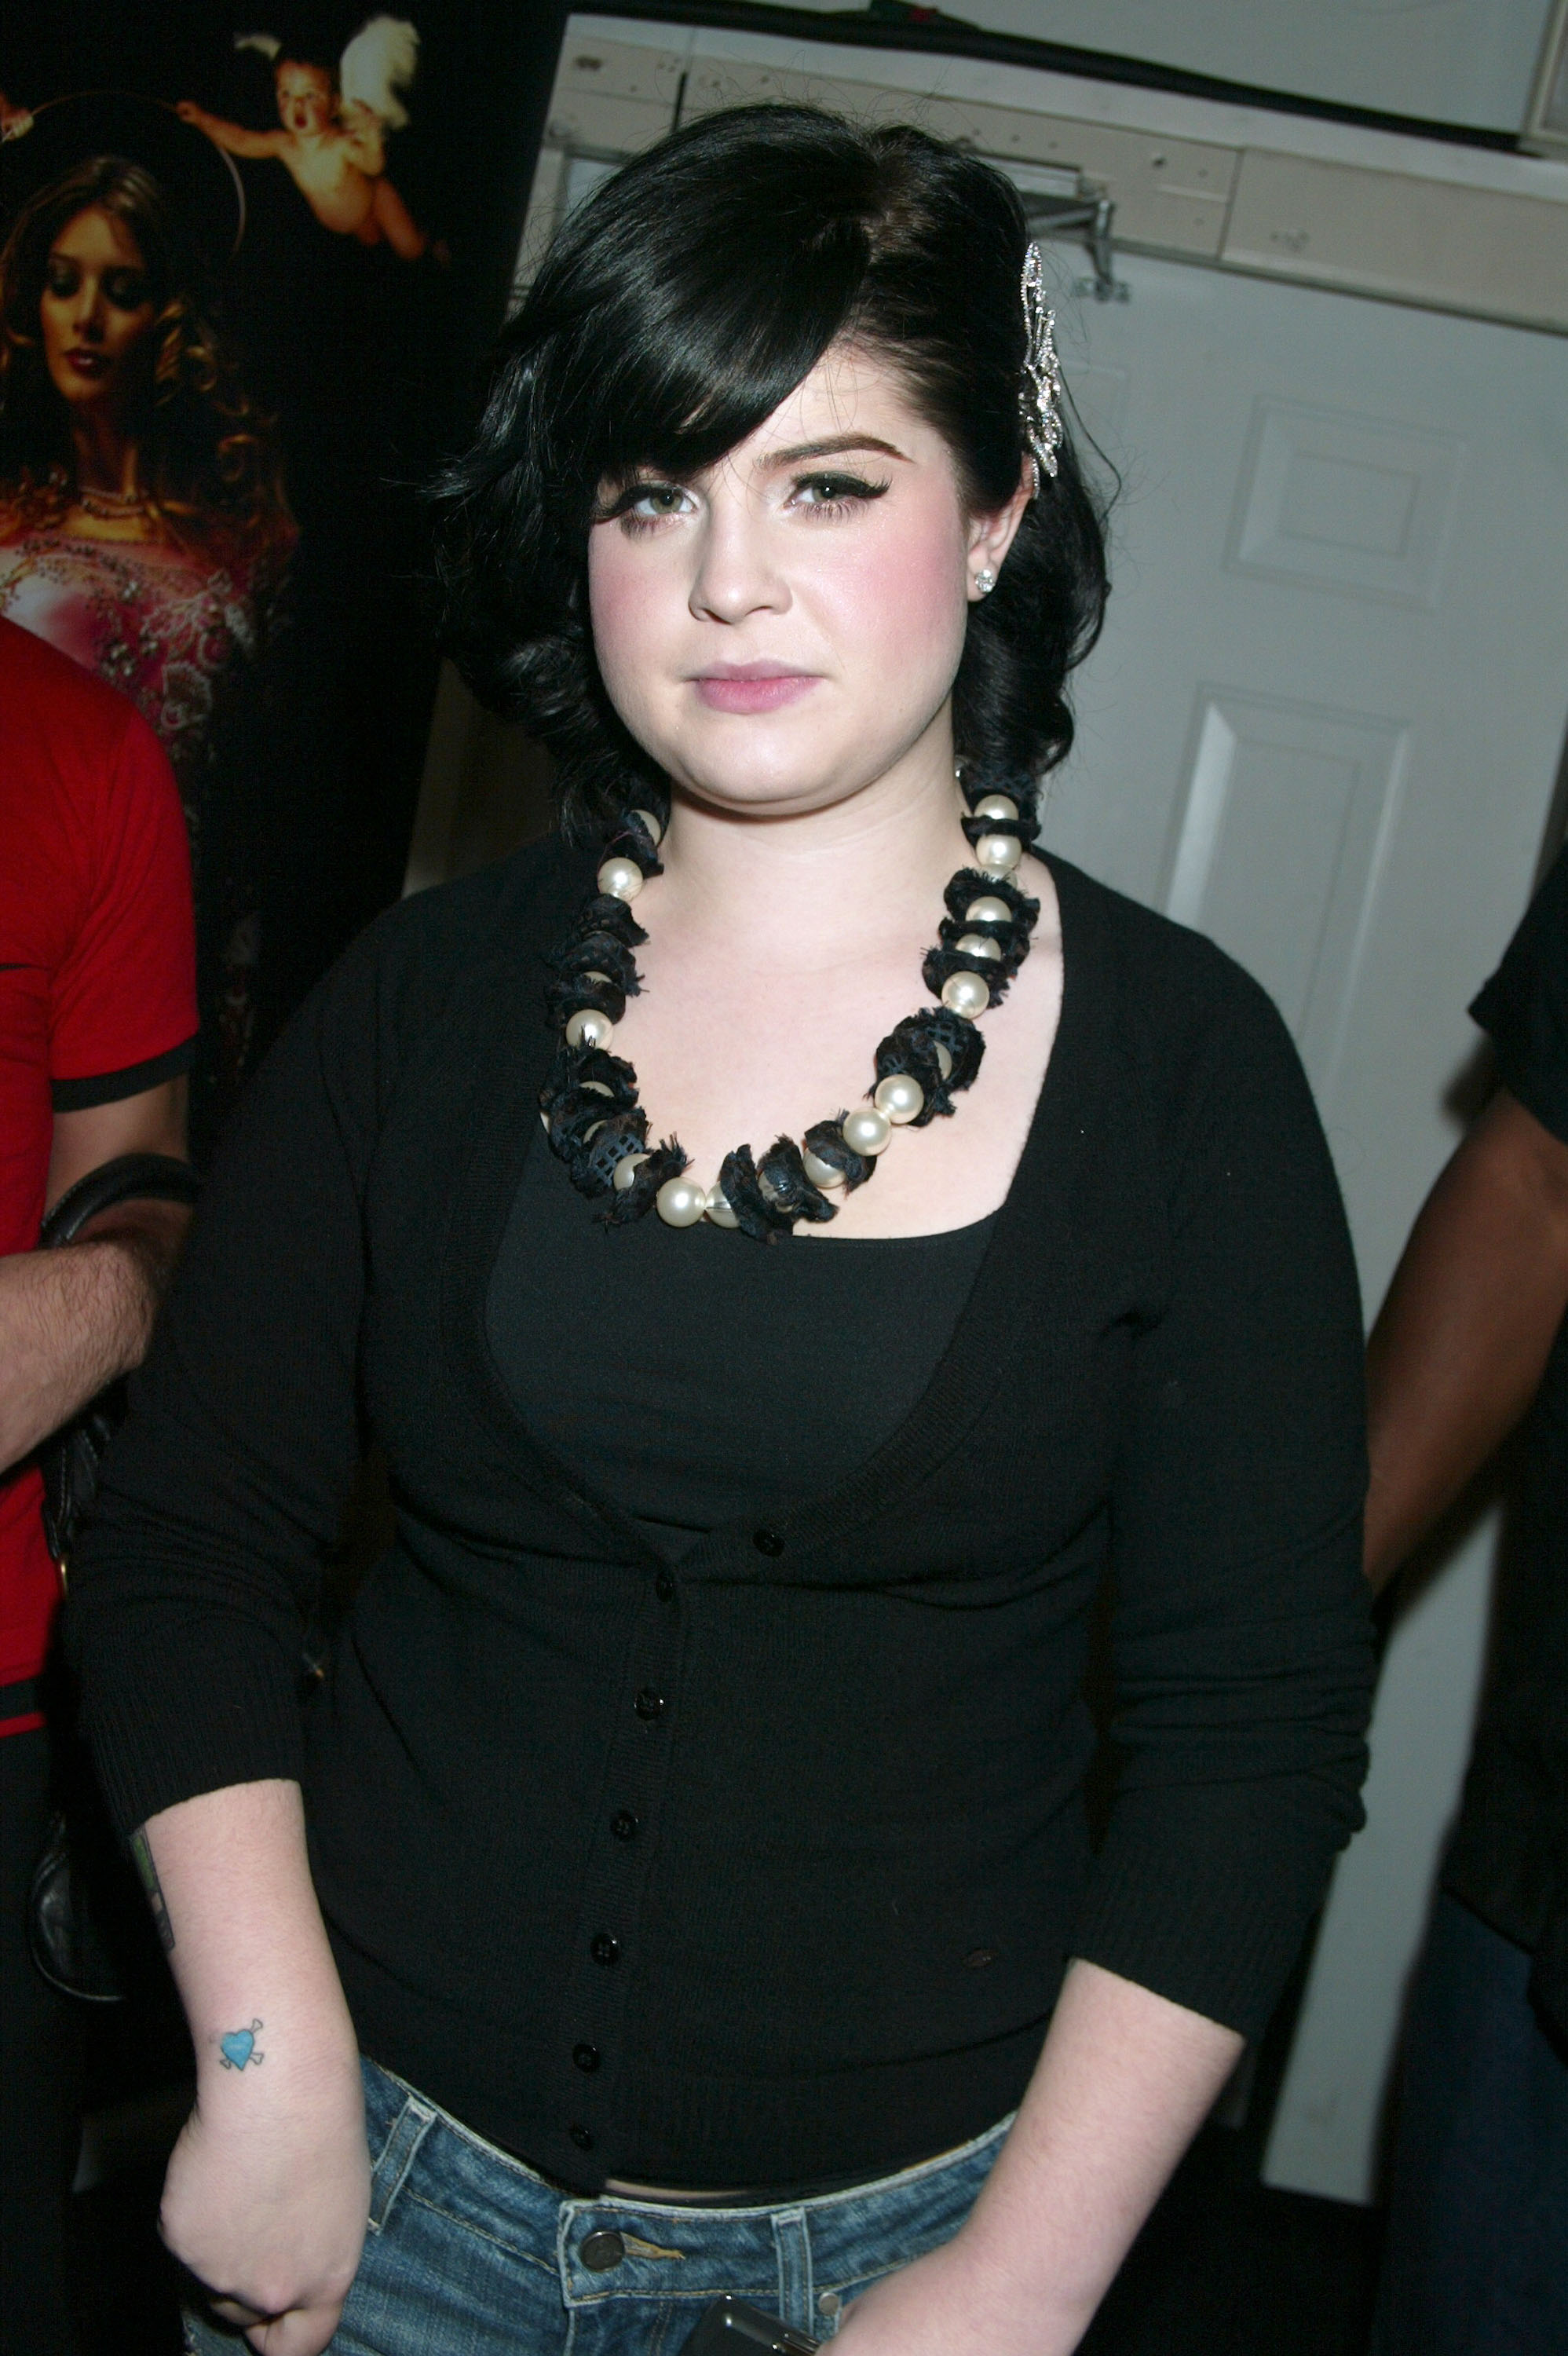 Kelly Osbourne at Olympus Fashion Week in New York City in 2006 | Source: Getty Images